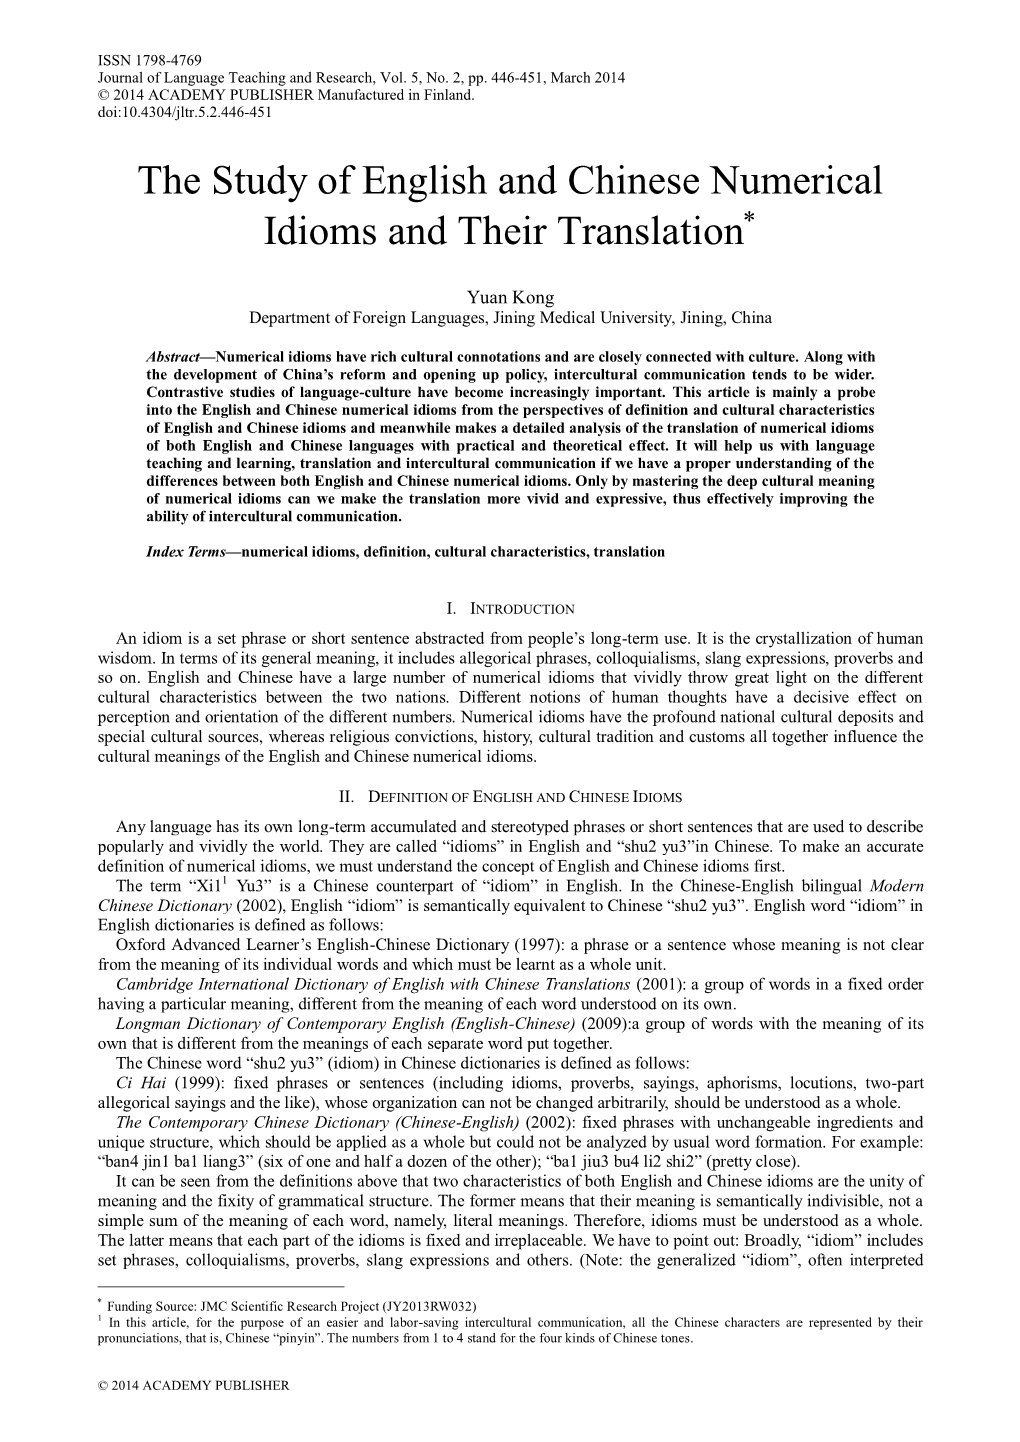 The Study of English and Chinese Numerical Idioms and Their Translation